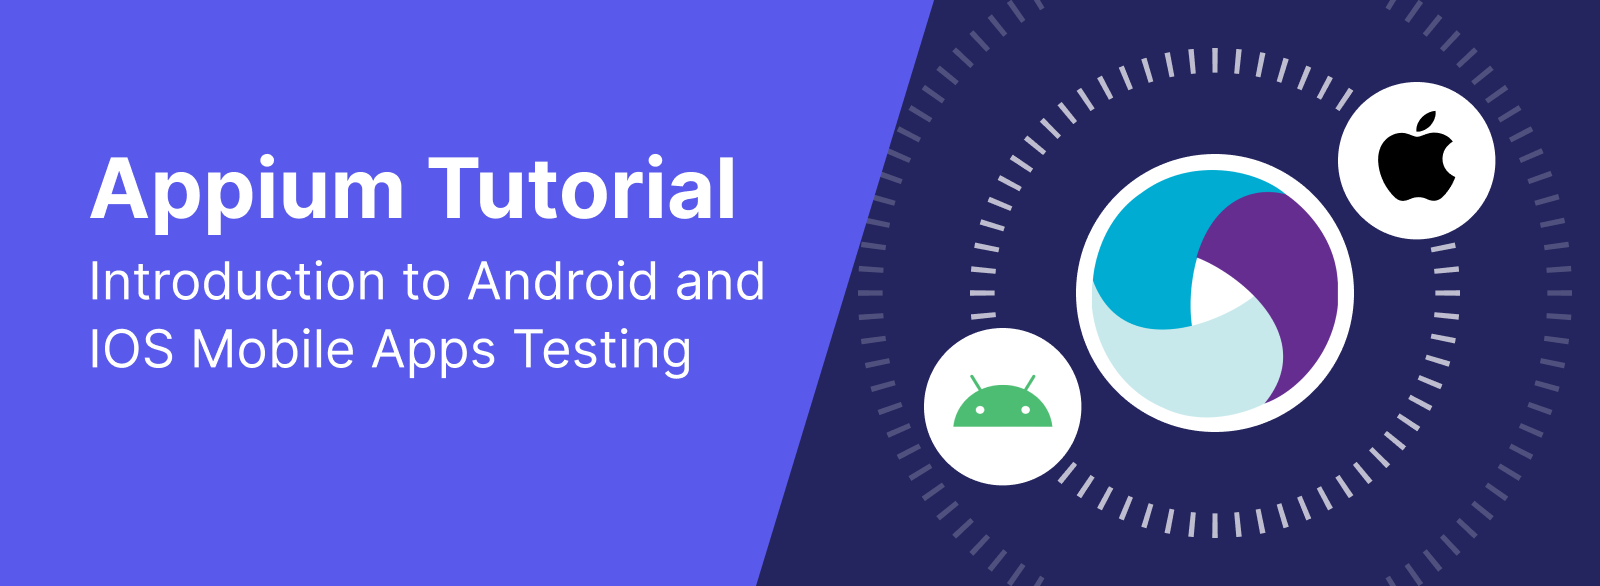 Appium Tutorial for Testing Android and IOS Mobile Apps